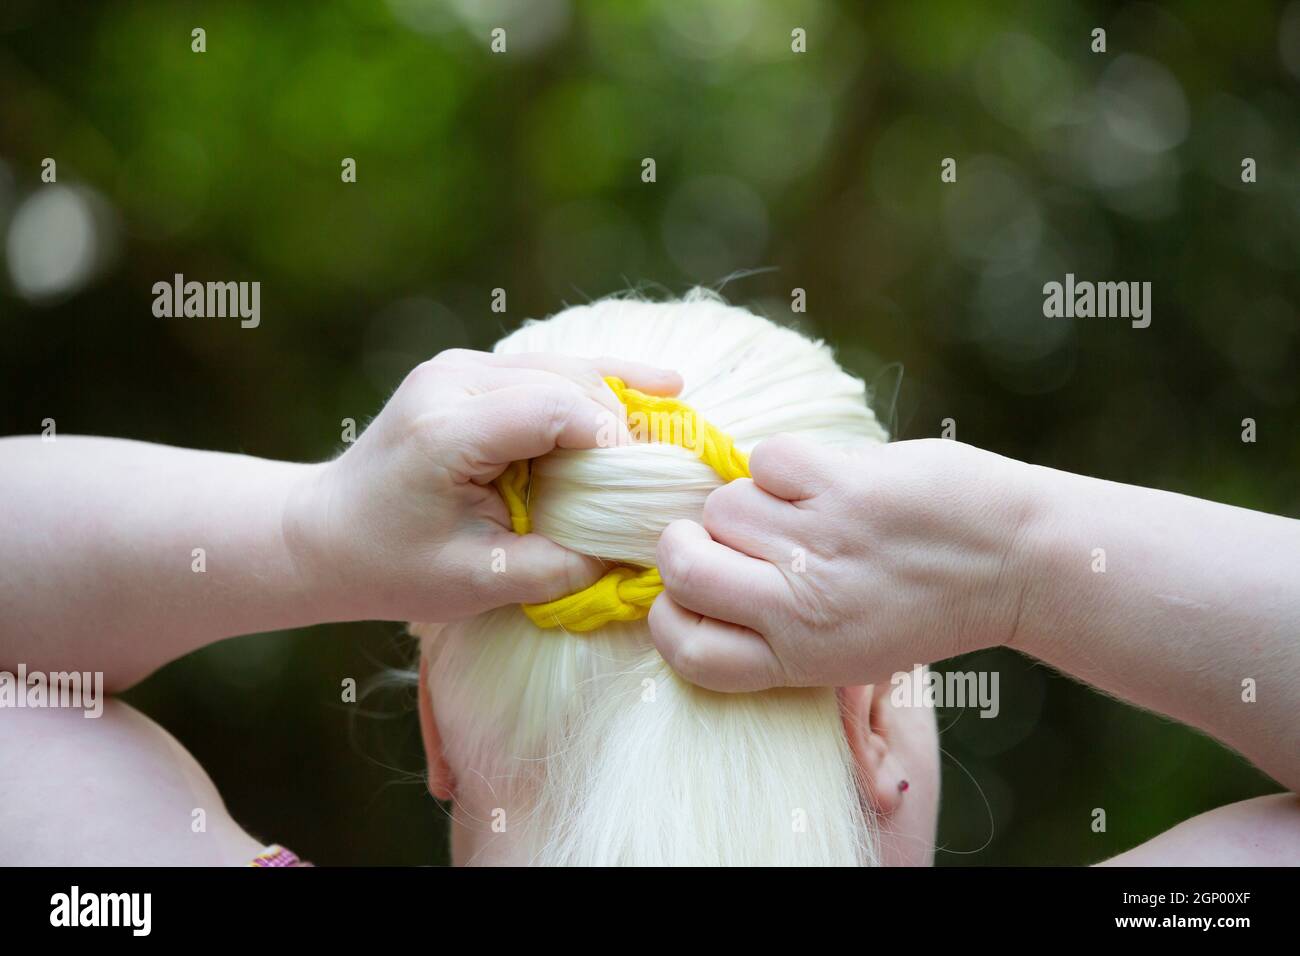 Woman wrapping her long, white hair into a yellow scrunchie Stock Photo